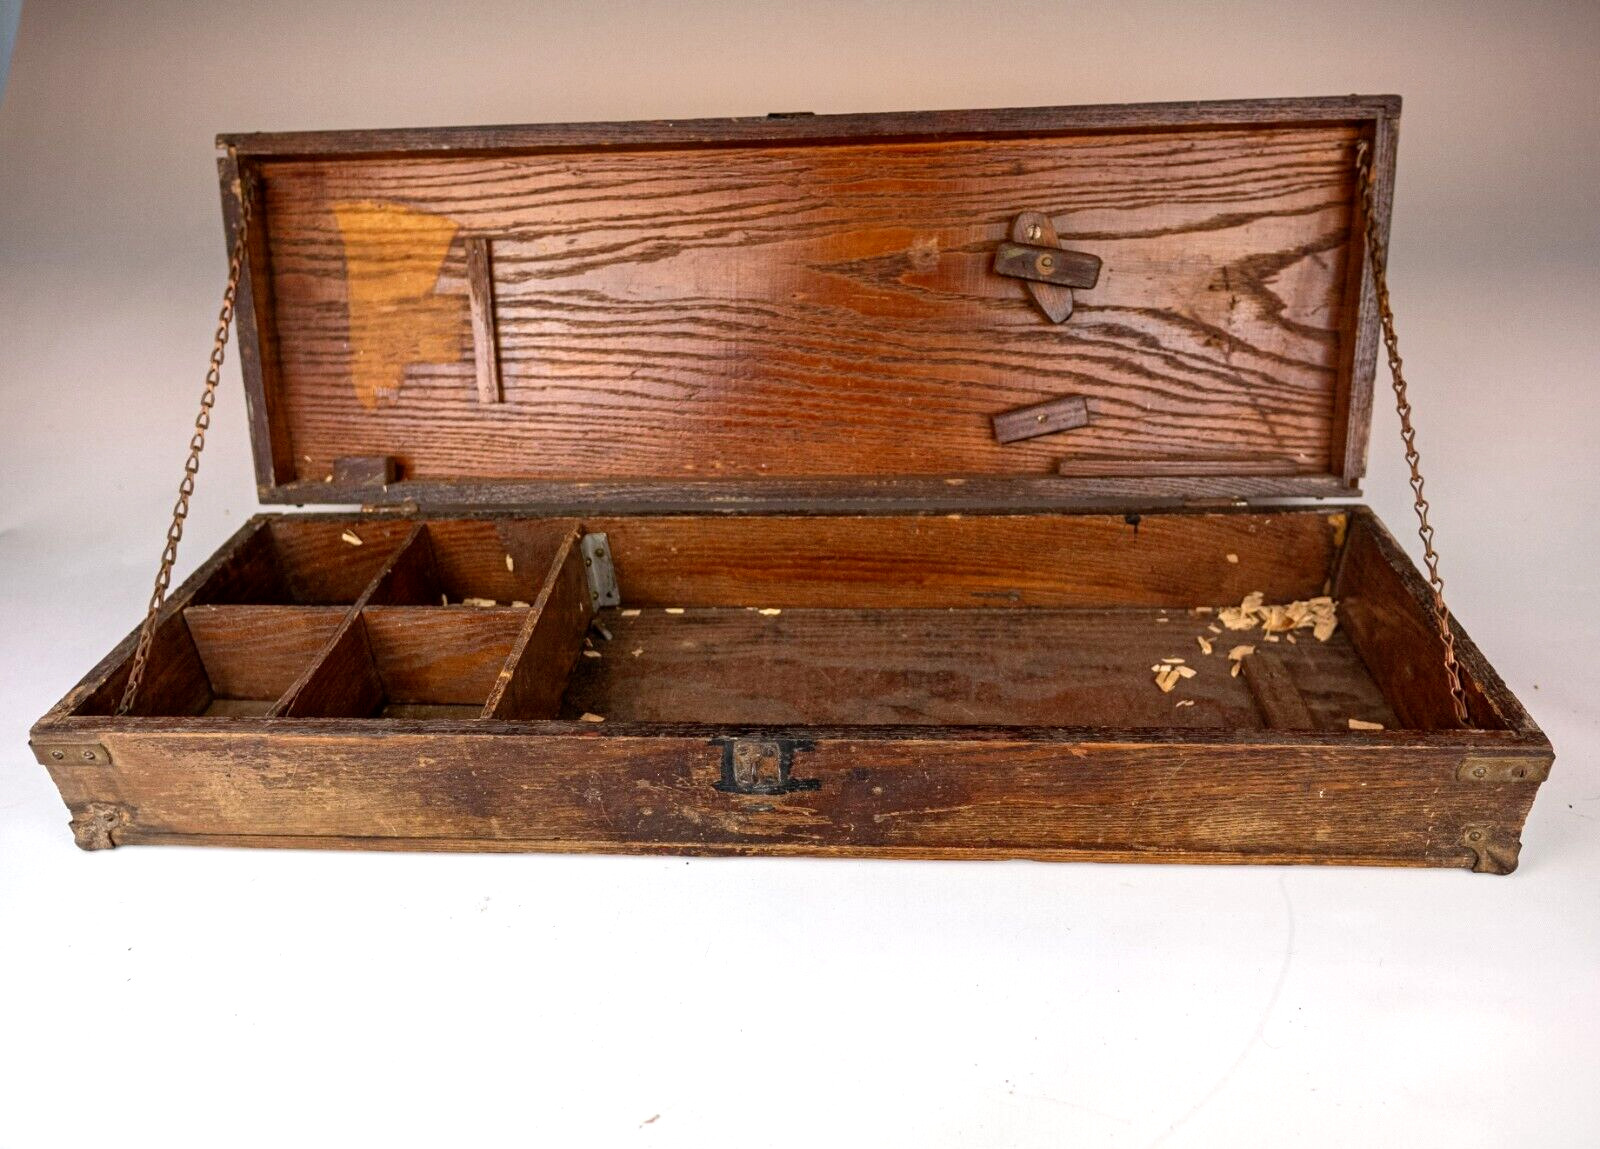 Vintage Simmons K-1 Keen Kutter Tool Box – Cabinet - Chest with Logo Early 1900s